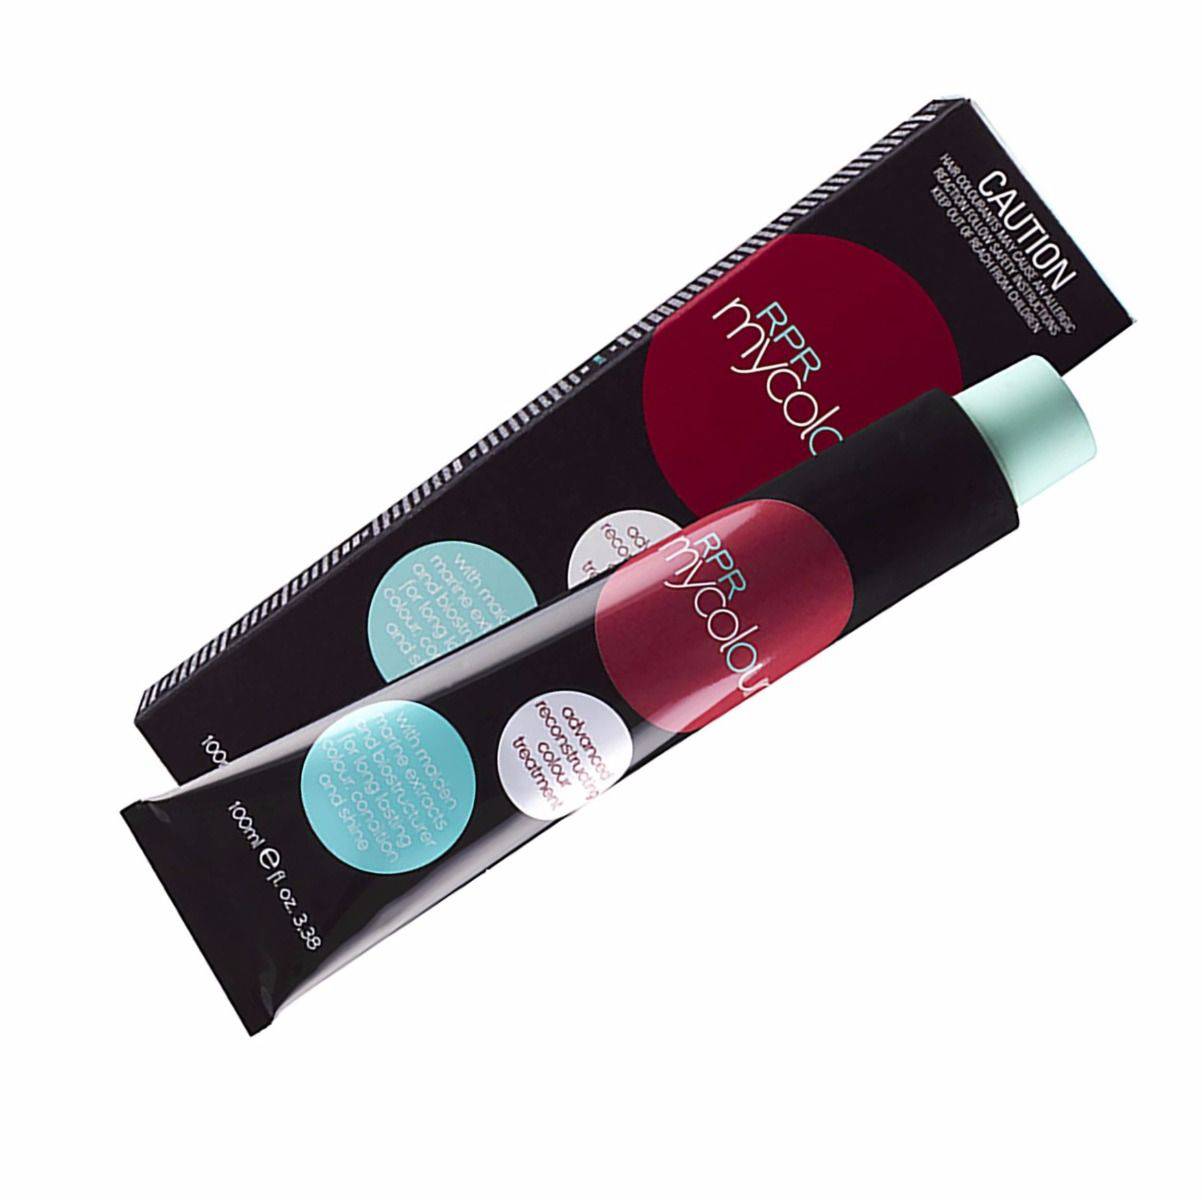 RPR My Colour 4.23 Level 4 Violet Gold 100g tube Mix 1:1.5 My Colour - On Line Hair Depot